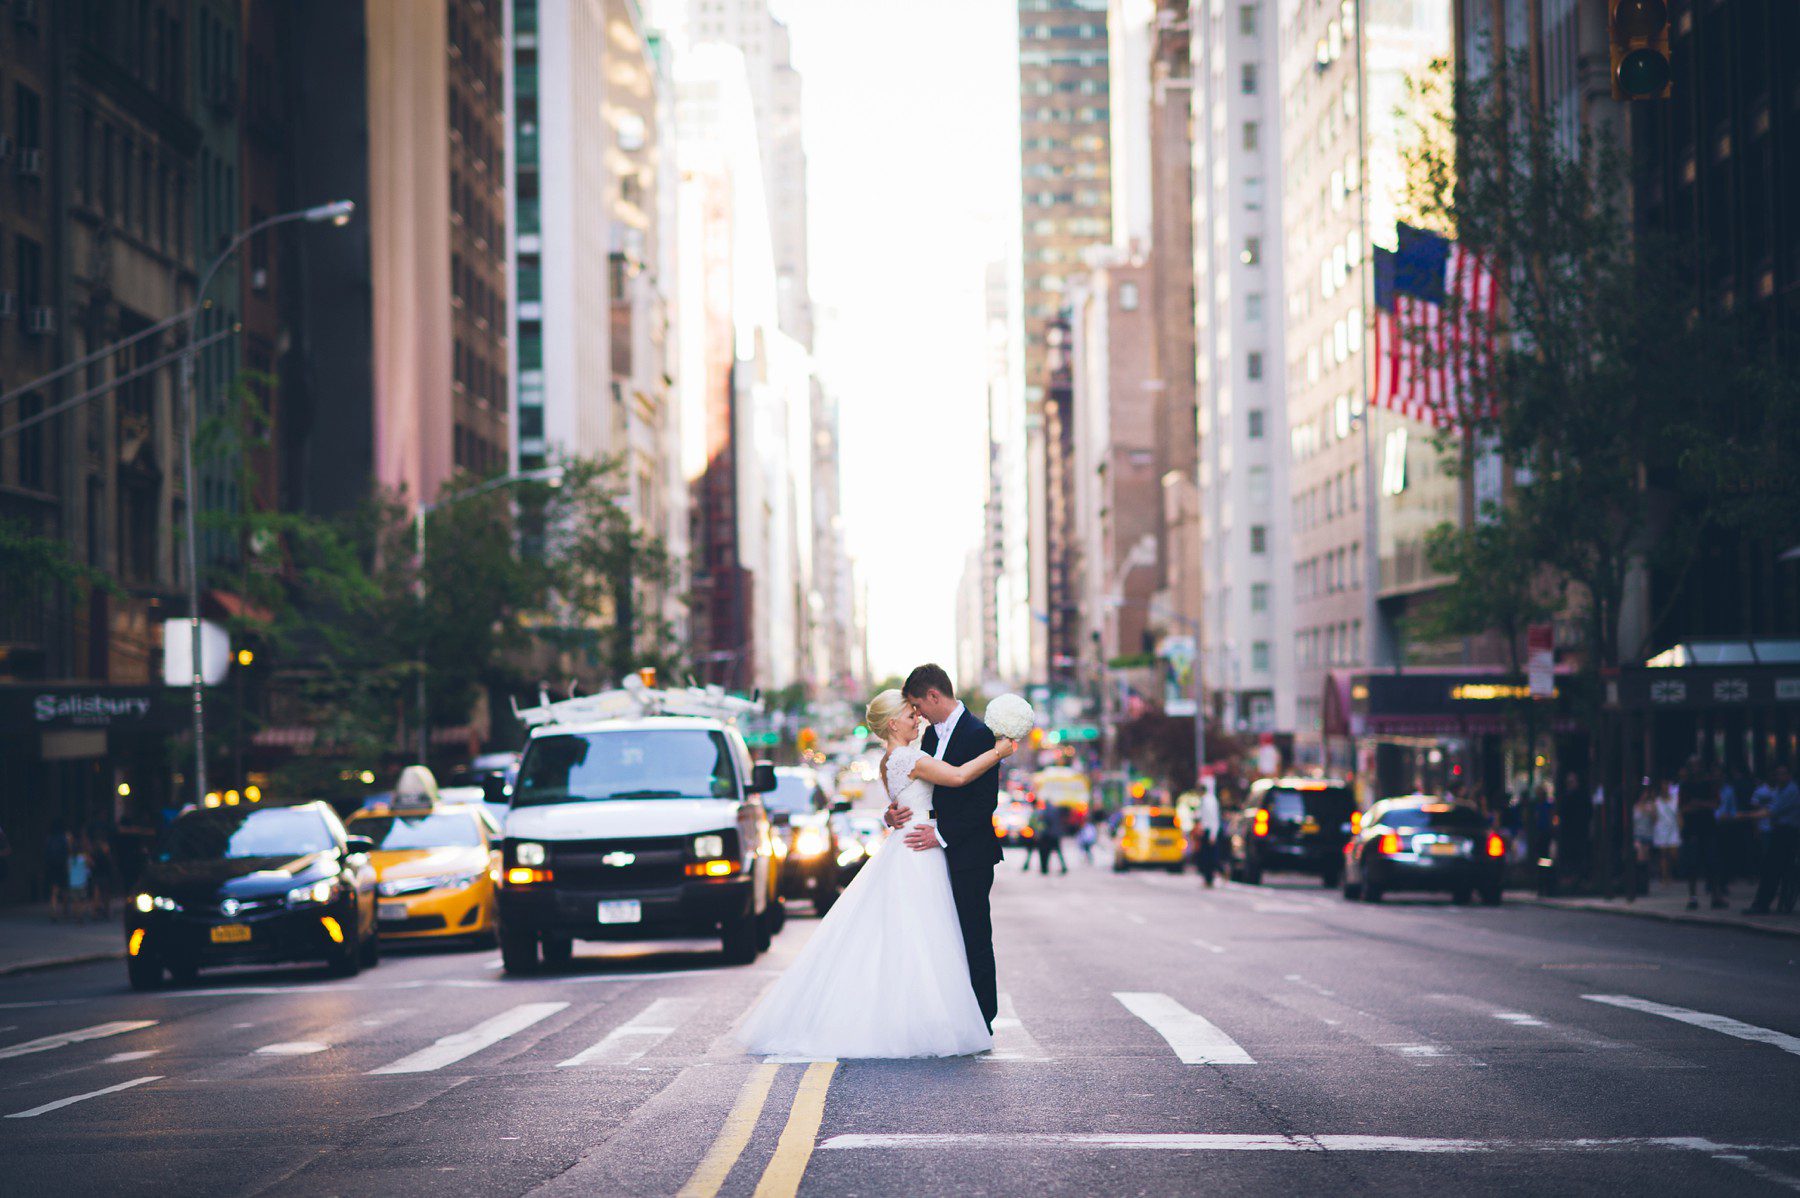 Jackie and Sascha, The New York Elopement Team